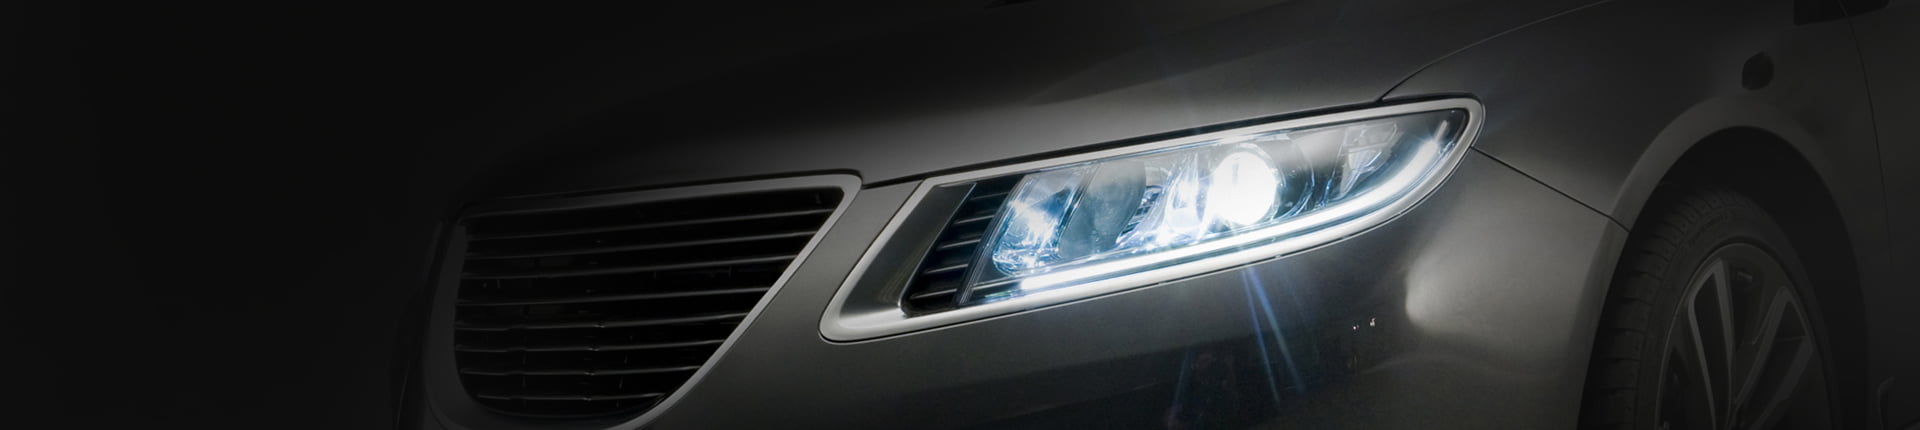 UV PROTECTIVE COATING FOR HEADLIGHTS // SYSTEM D